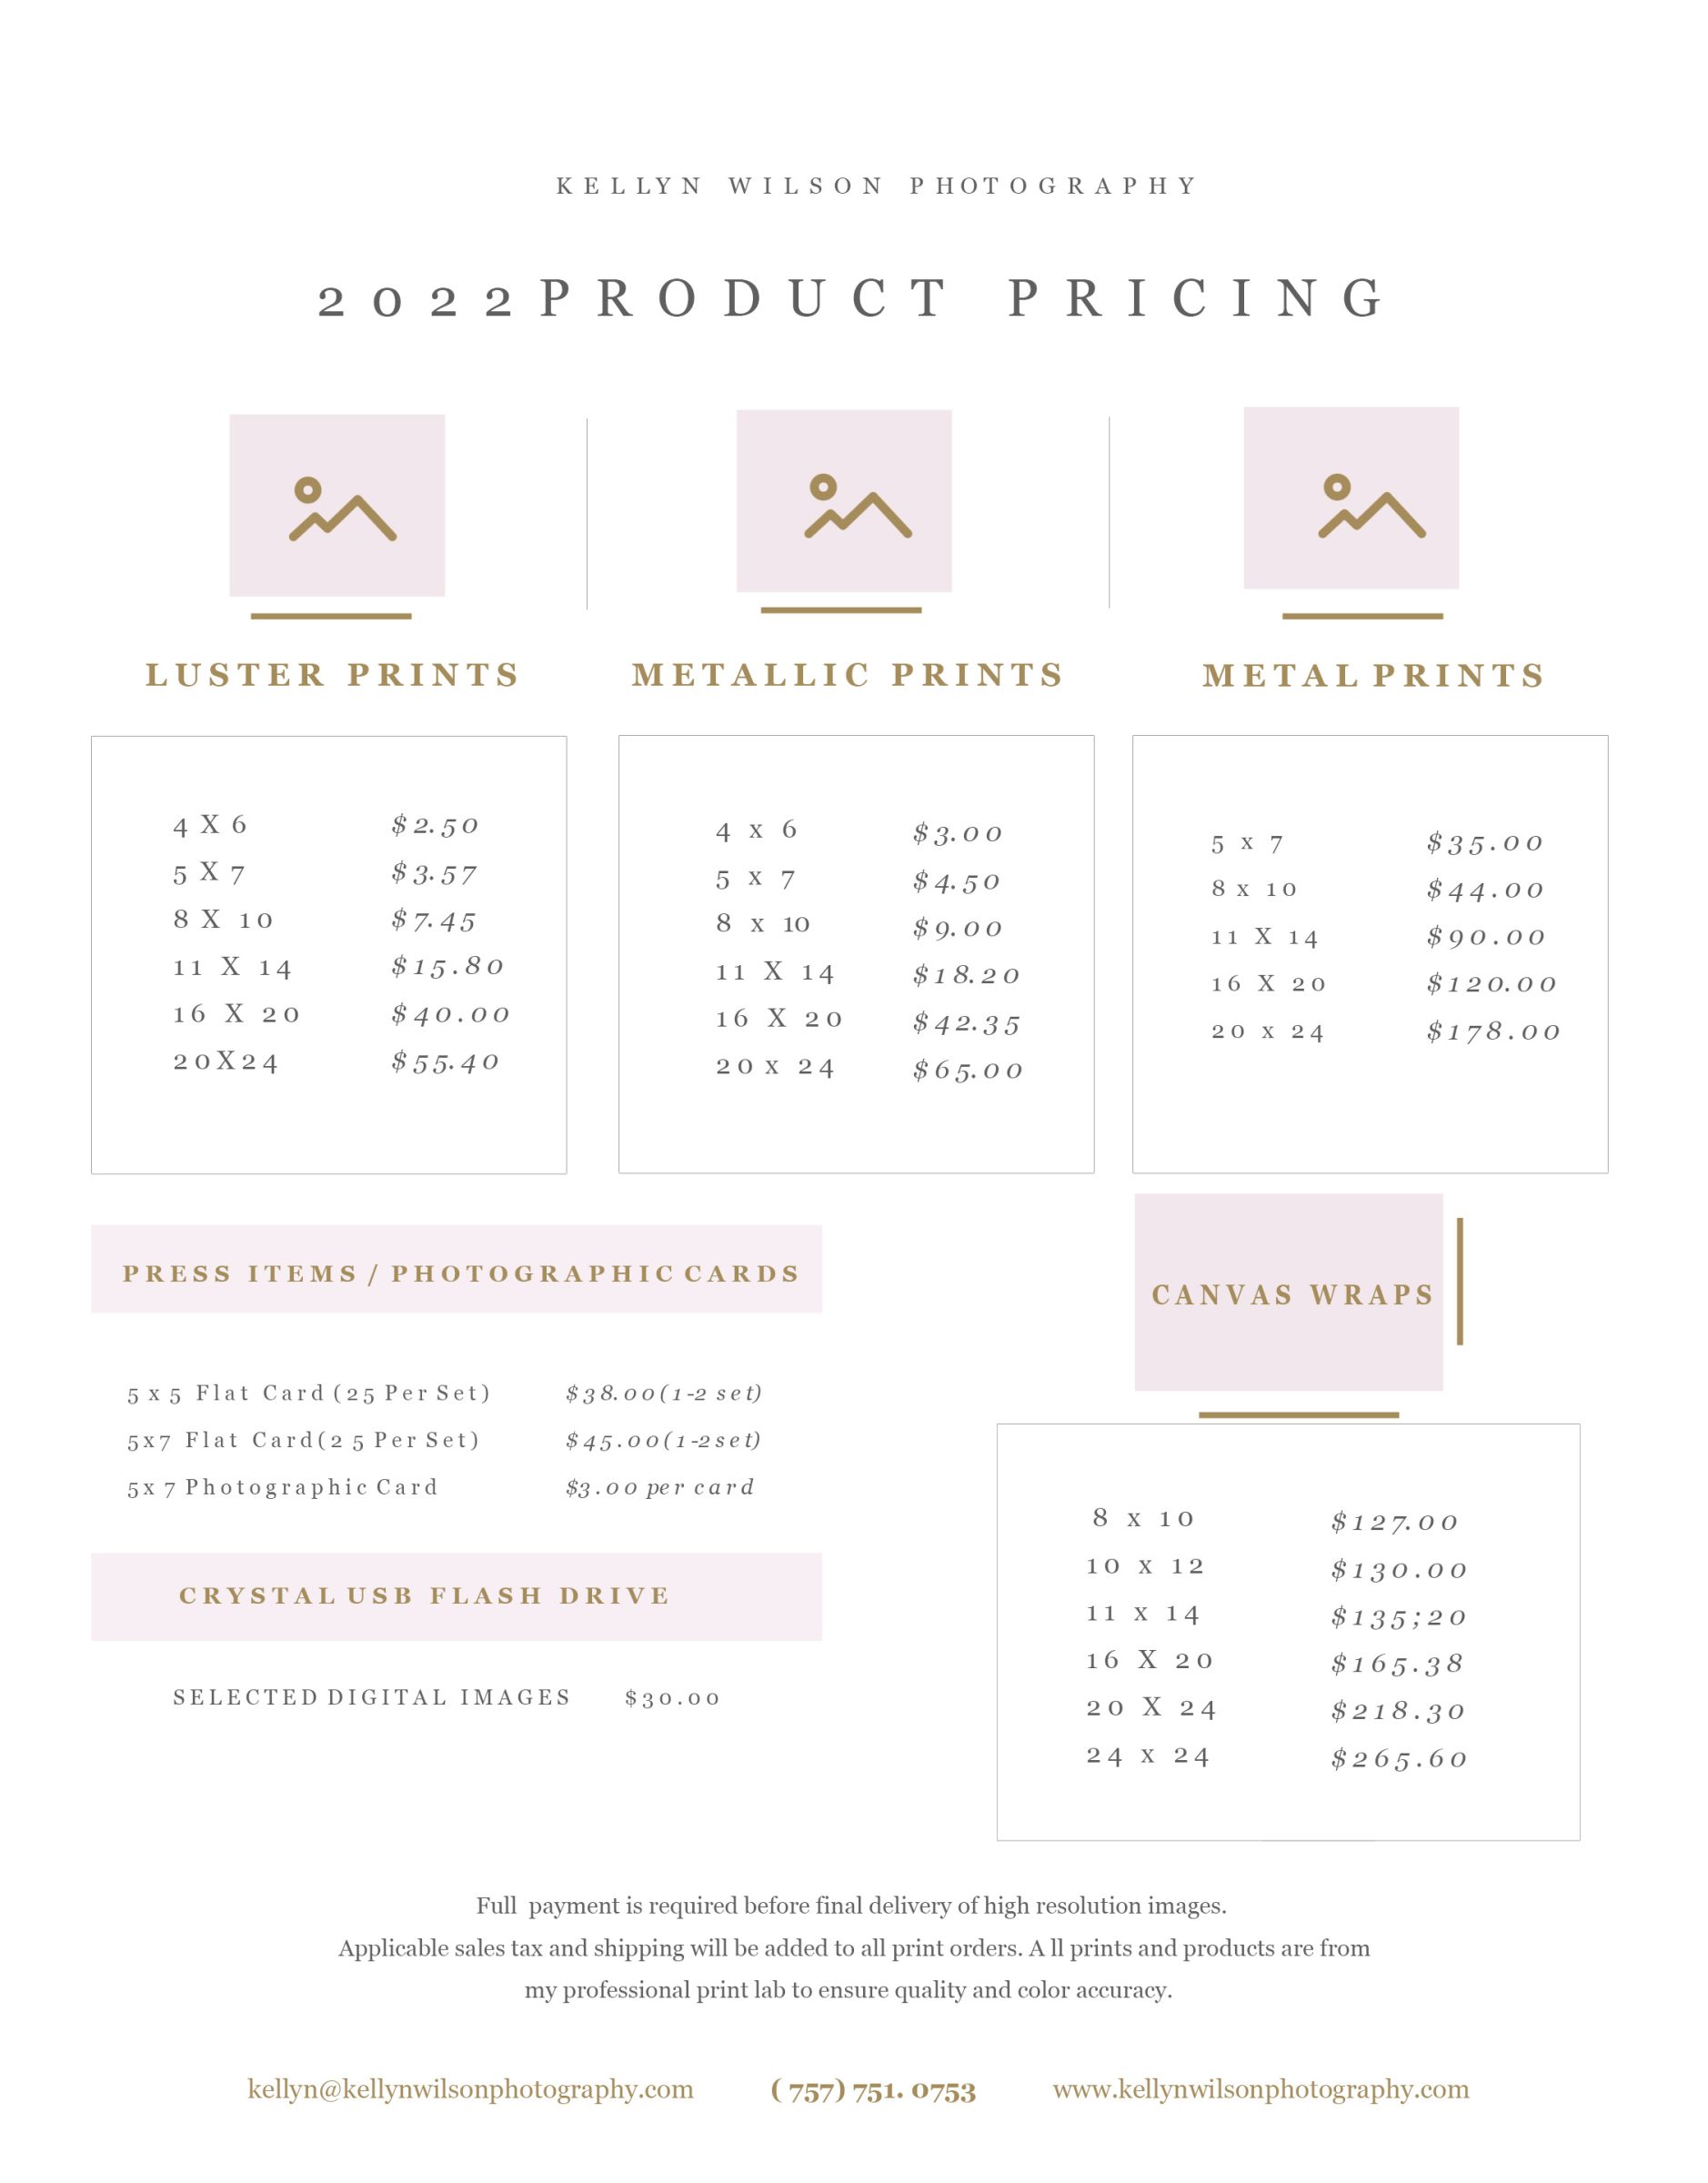 Kellyn Wilson Photography | Pricing